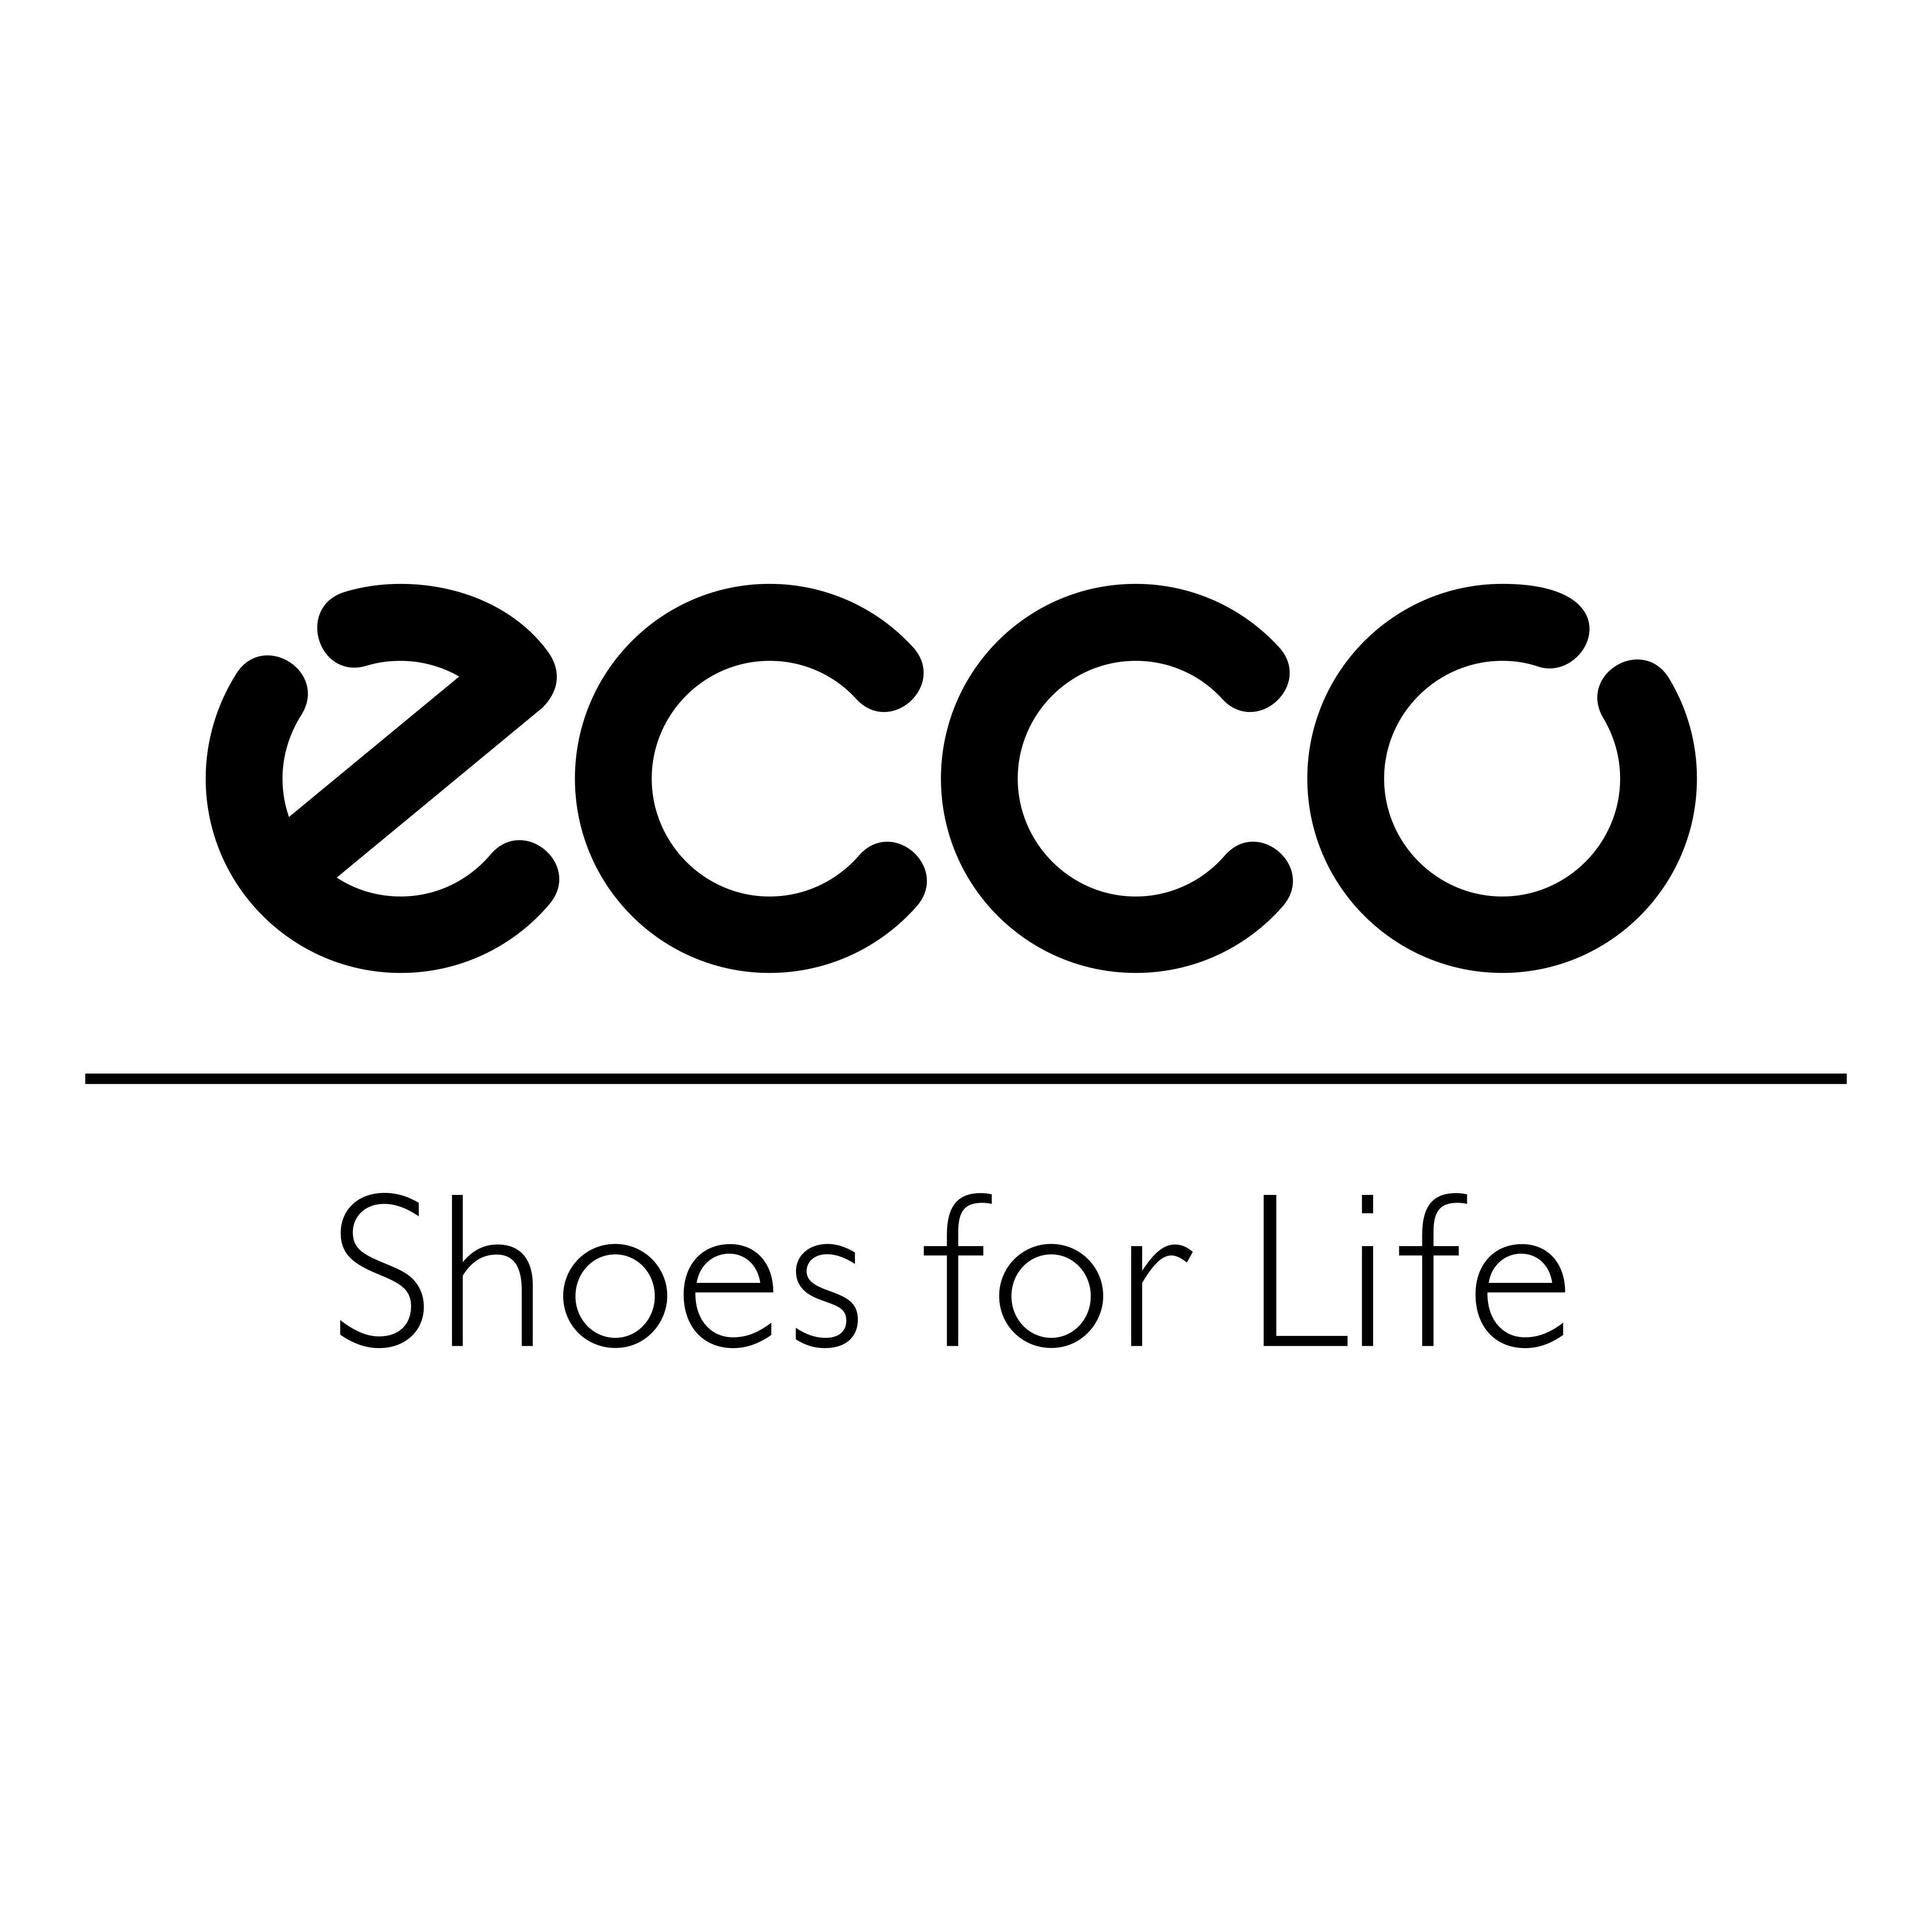 Shoes for Life - download.